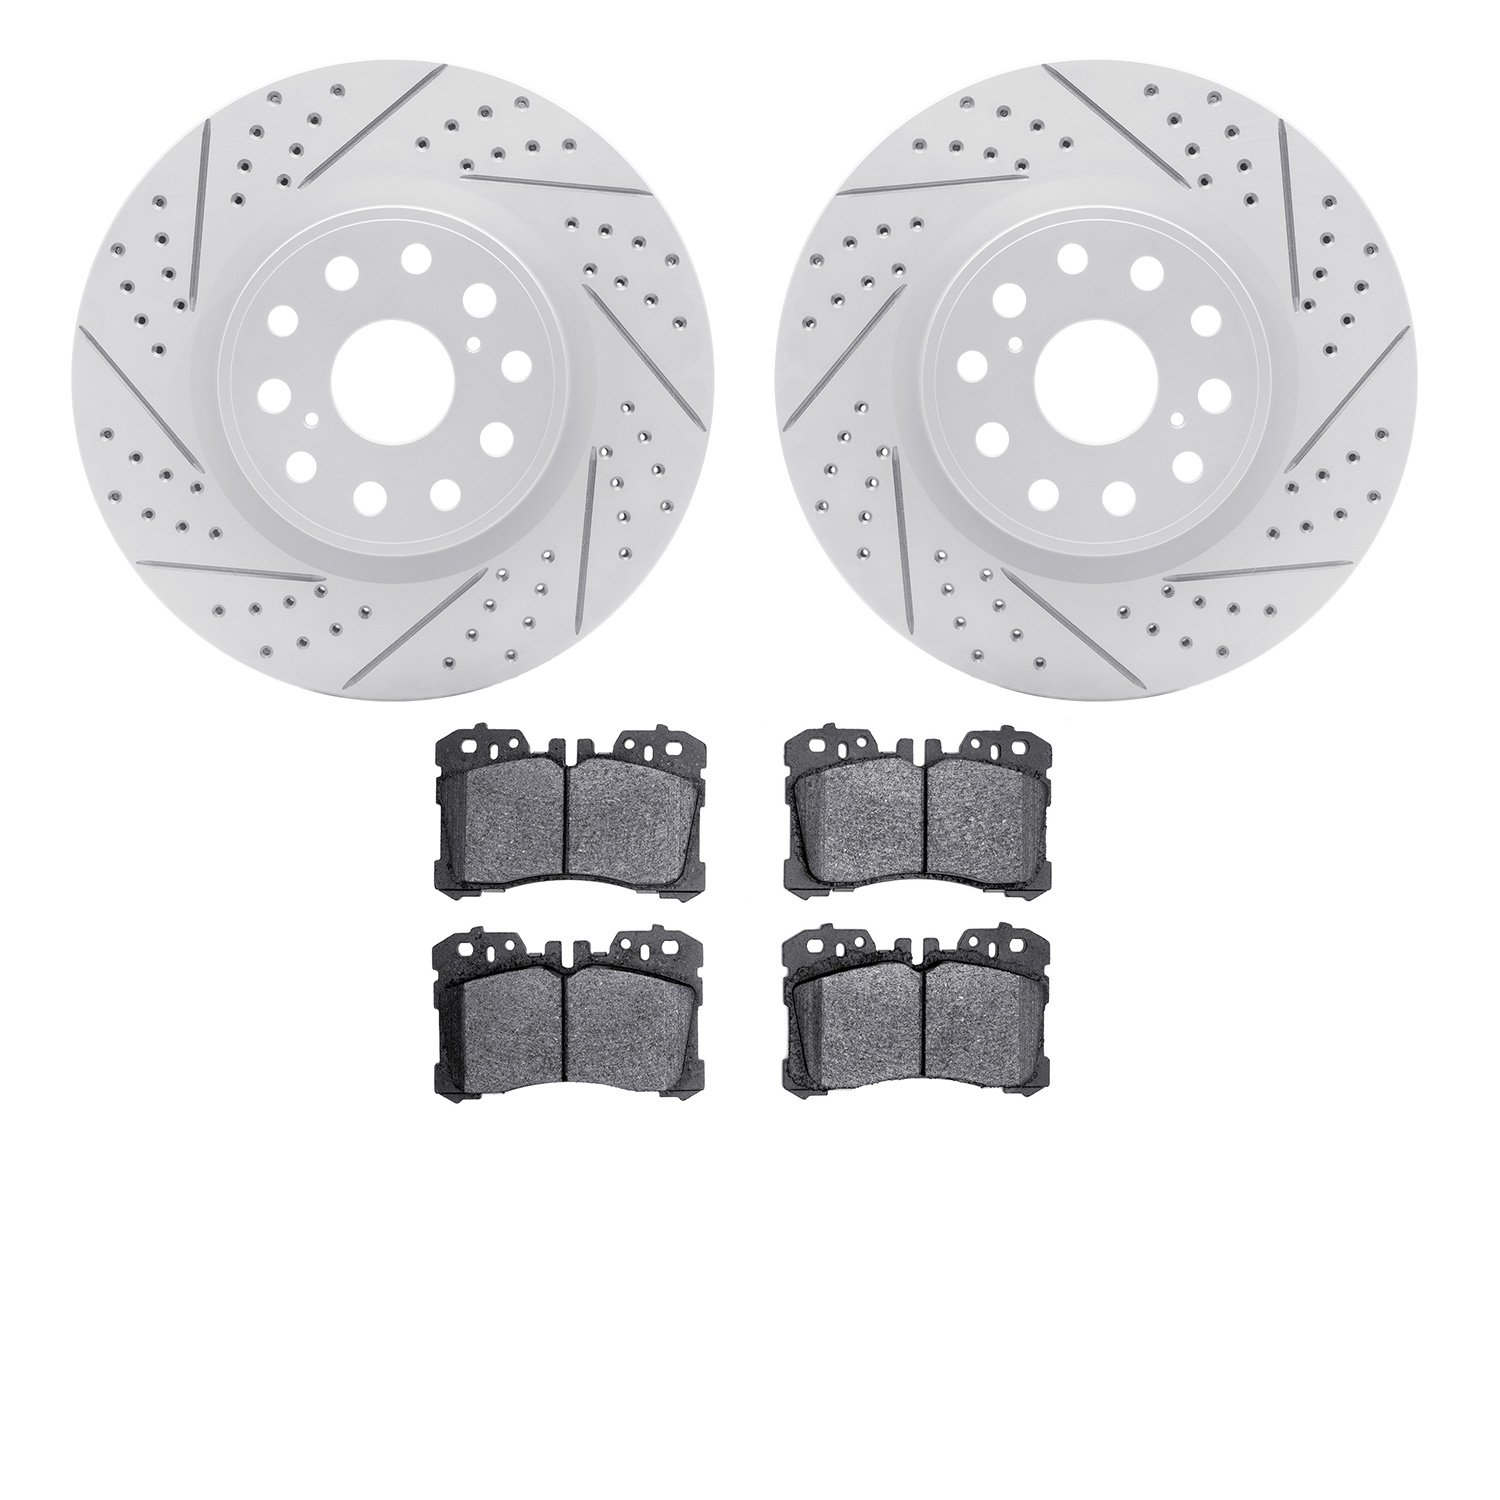 2502-75016 Geoperformance Drilled/Slotted Rotors w/5000 Advanced Brake Pads Kit, Fits Select Lexus/Toyota/Scion, Position: Front